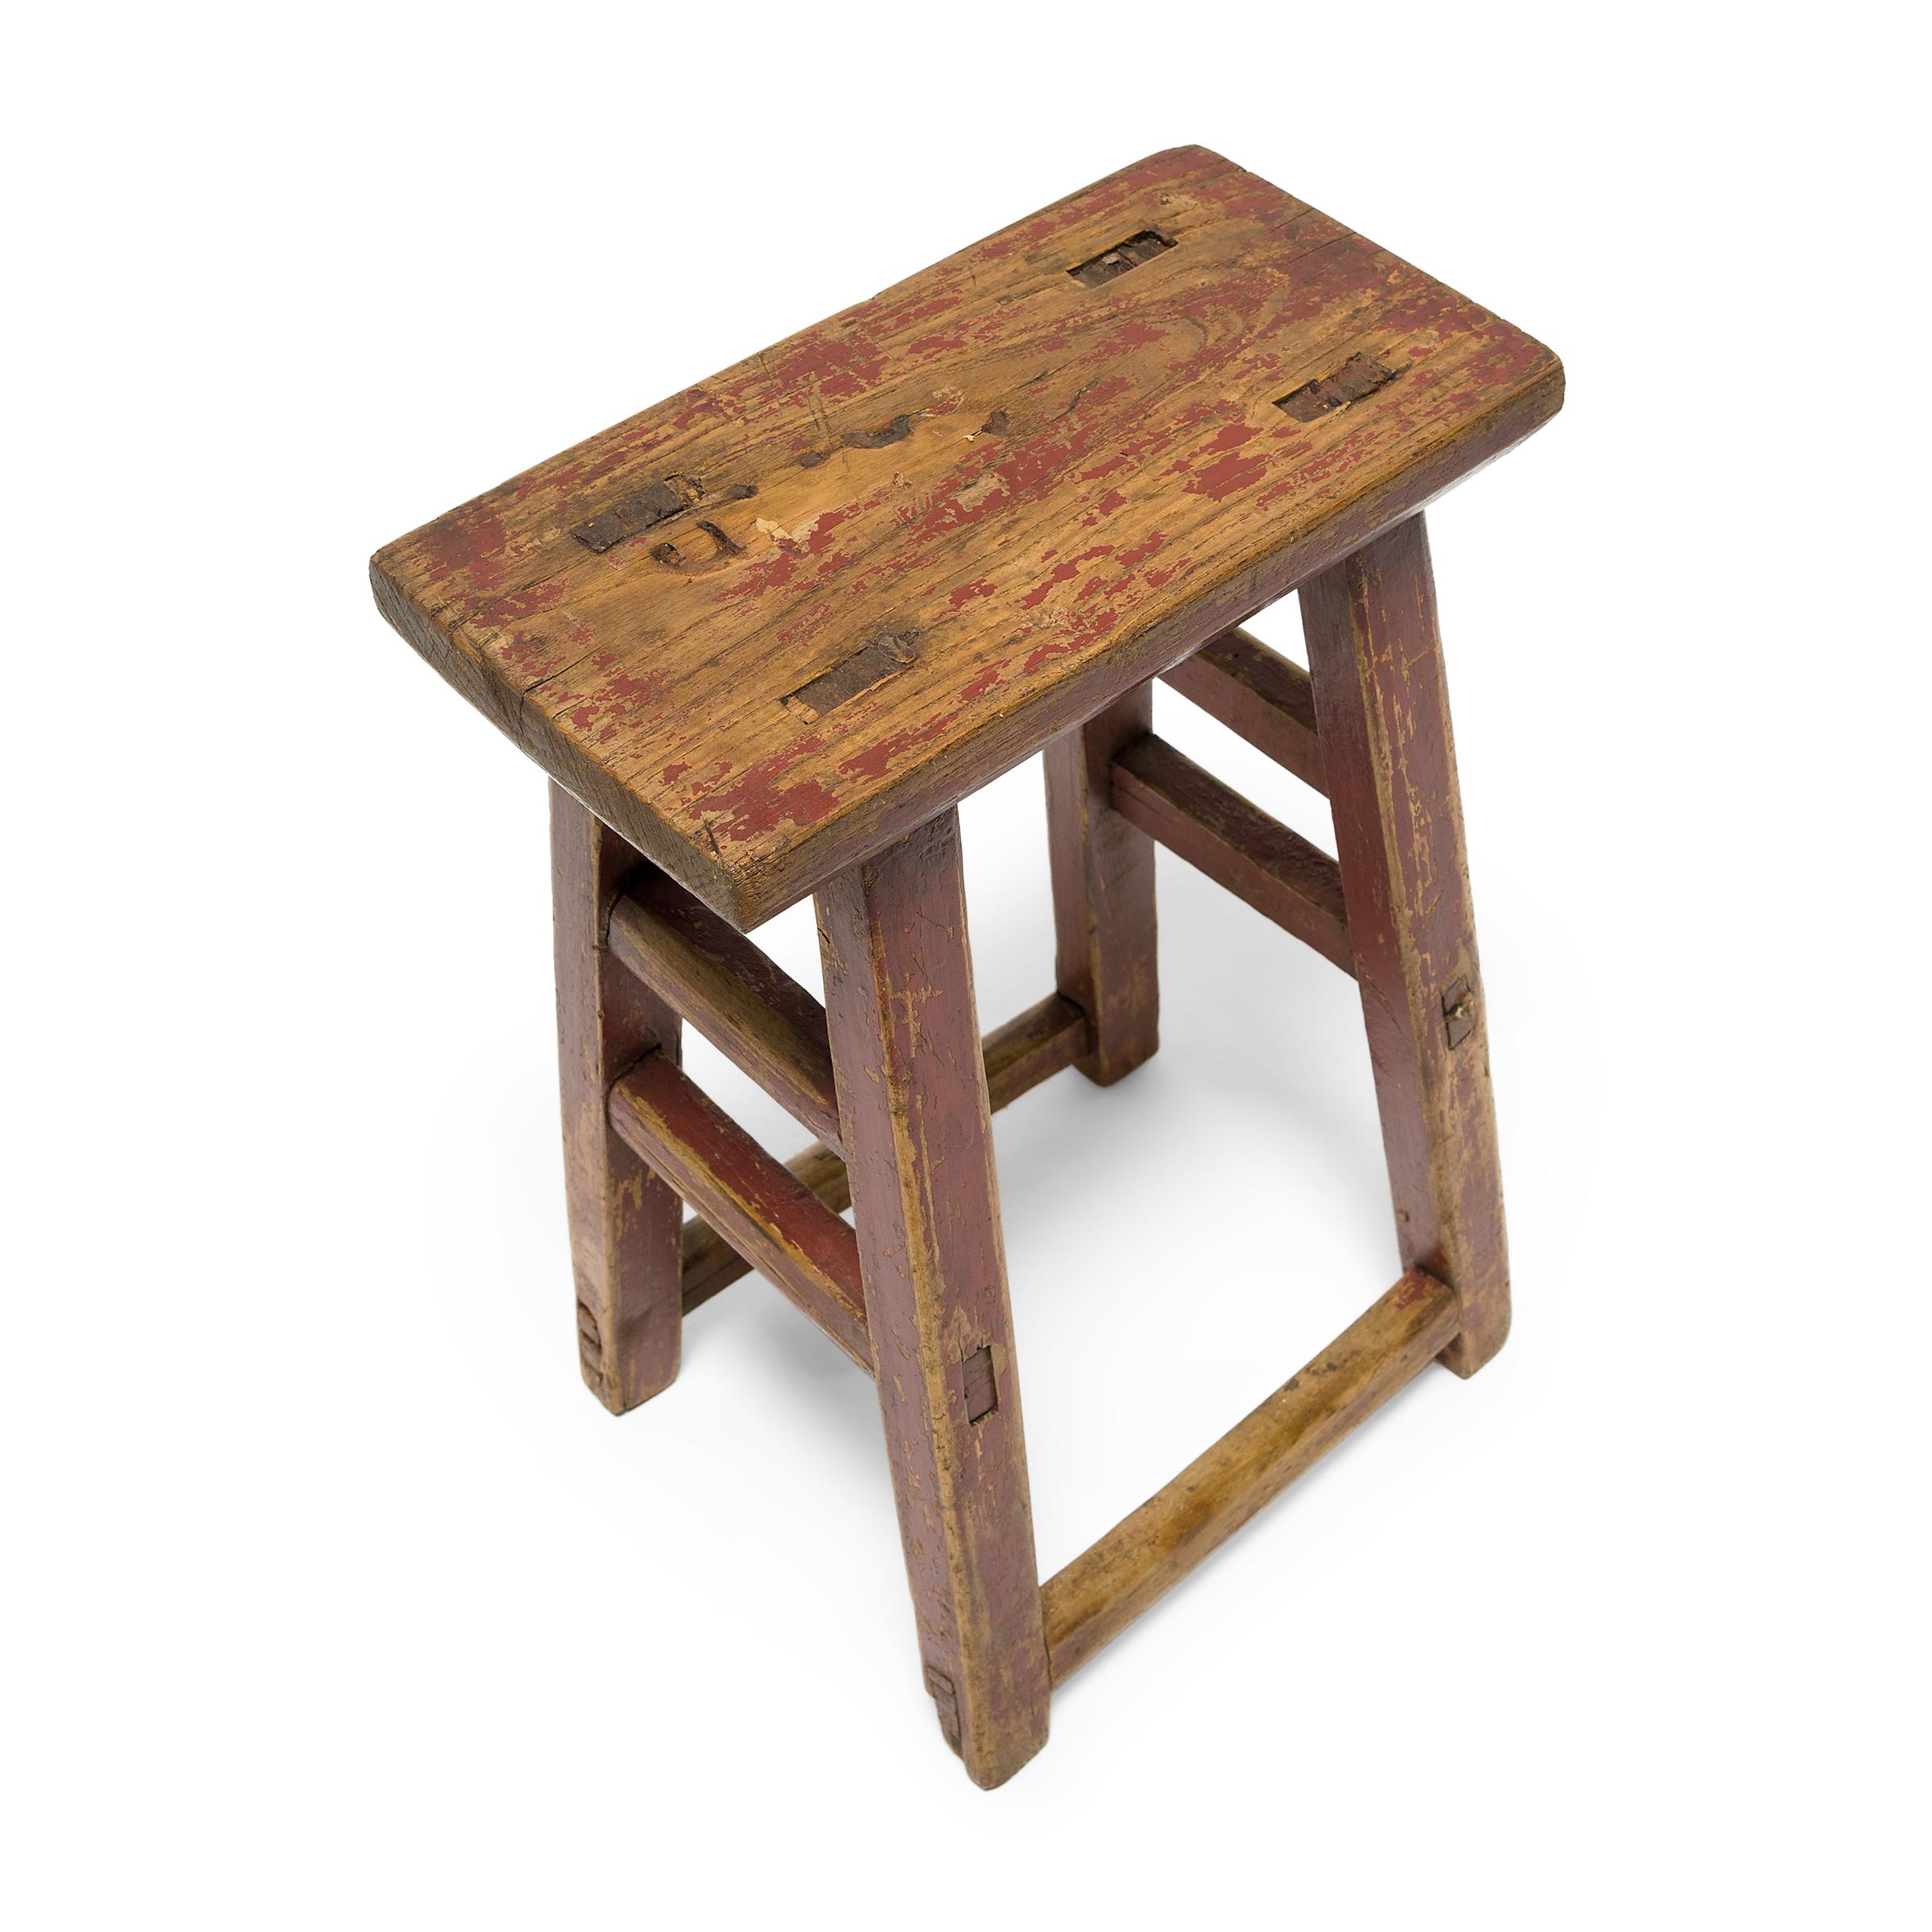 Deceptively simple, this early 20th century stool from Shanxi province shows off the ingenious mortise-and-tenon joinery methods traditionally used by Chinese carpenters. The stool has a rectangular seat supported by four splayed legs linked with